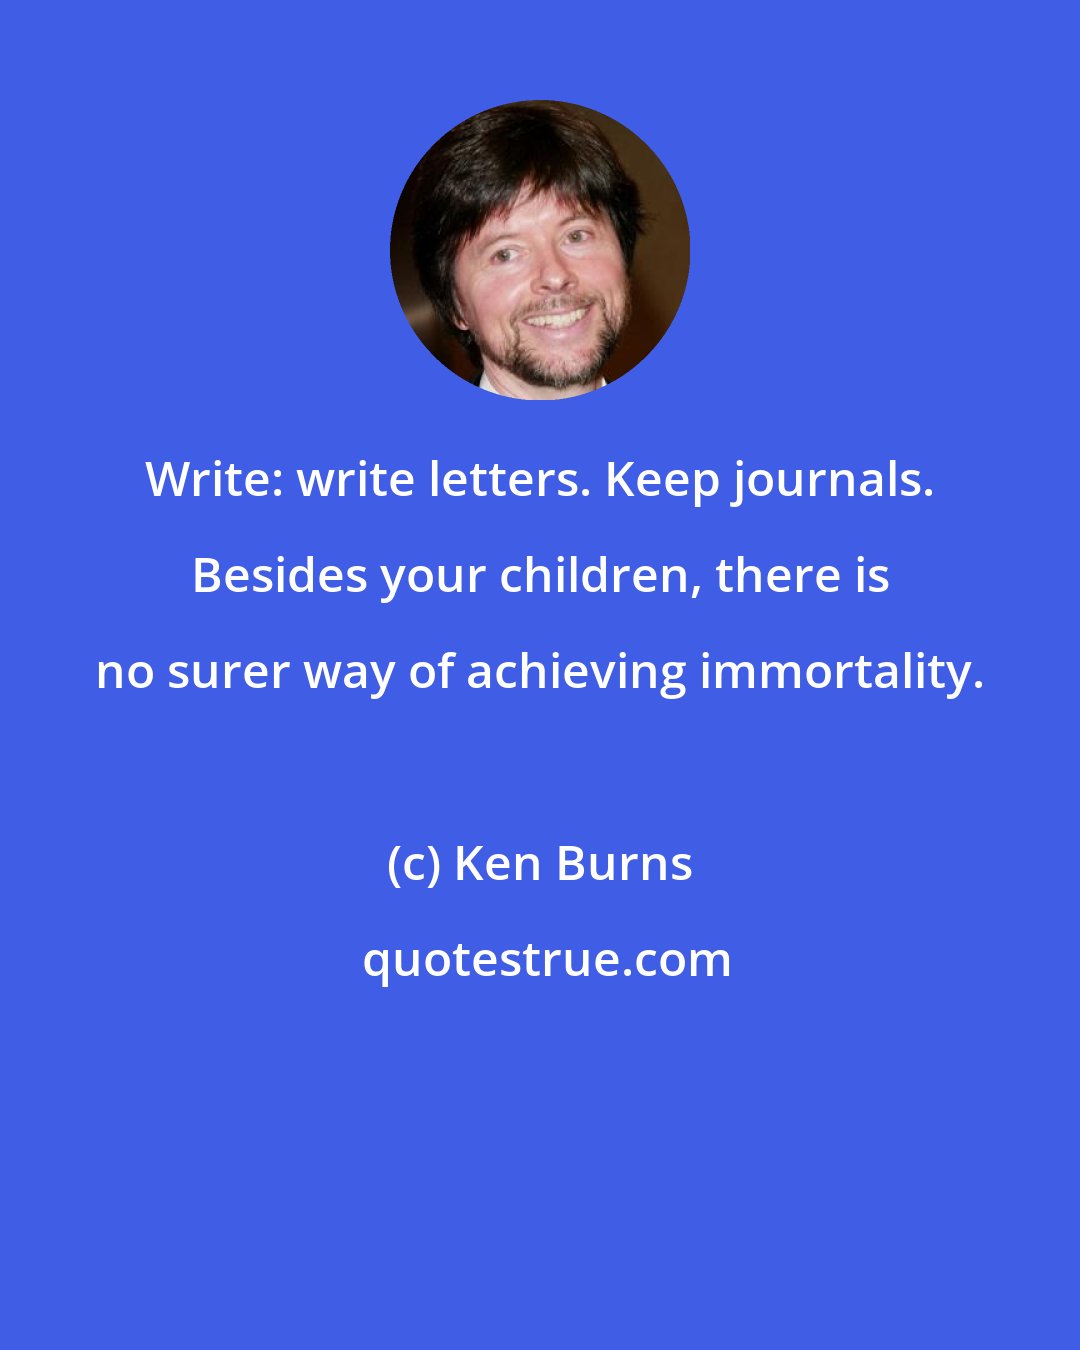 Ken Burns: Write: write letters. Keep journals. Besides your children, there is no surer way of achieving immortality.